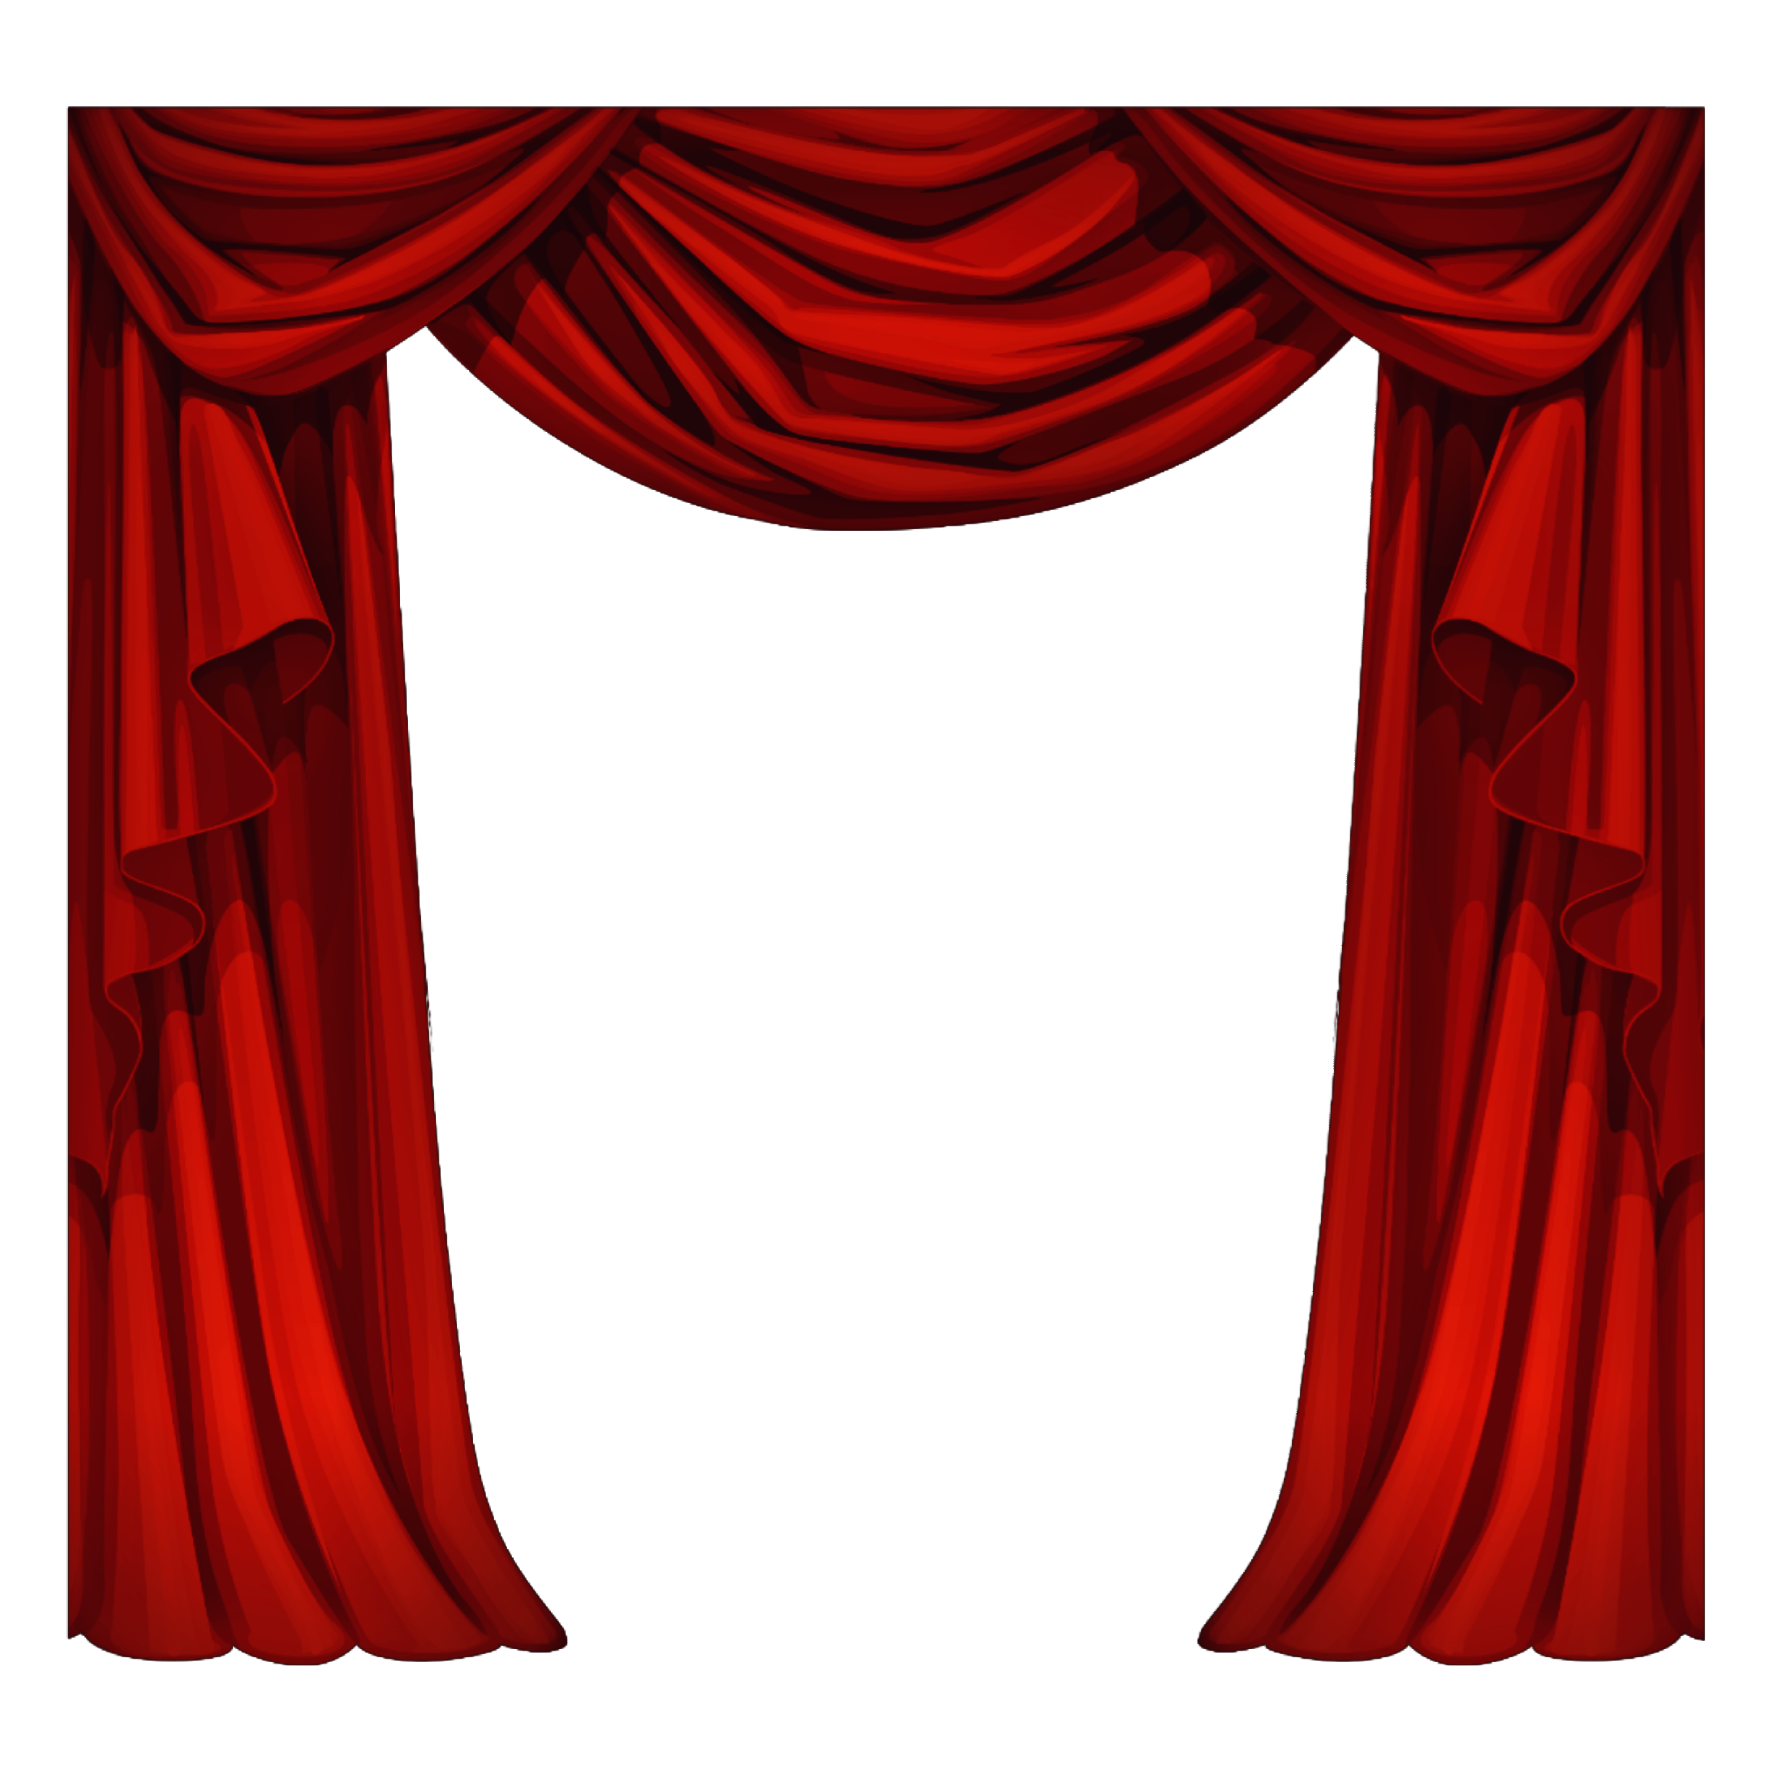 curtain clipart gold stage